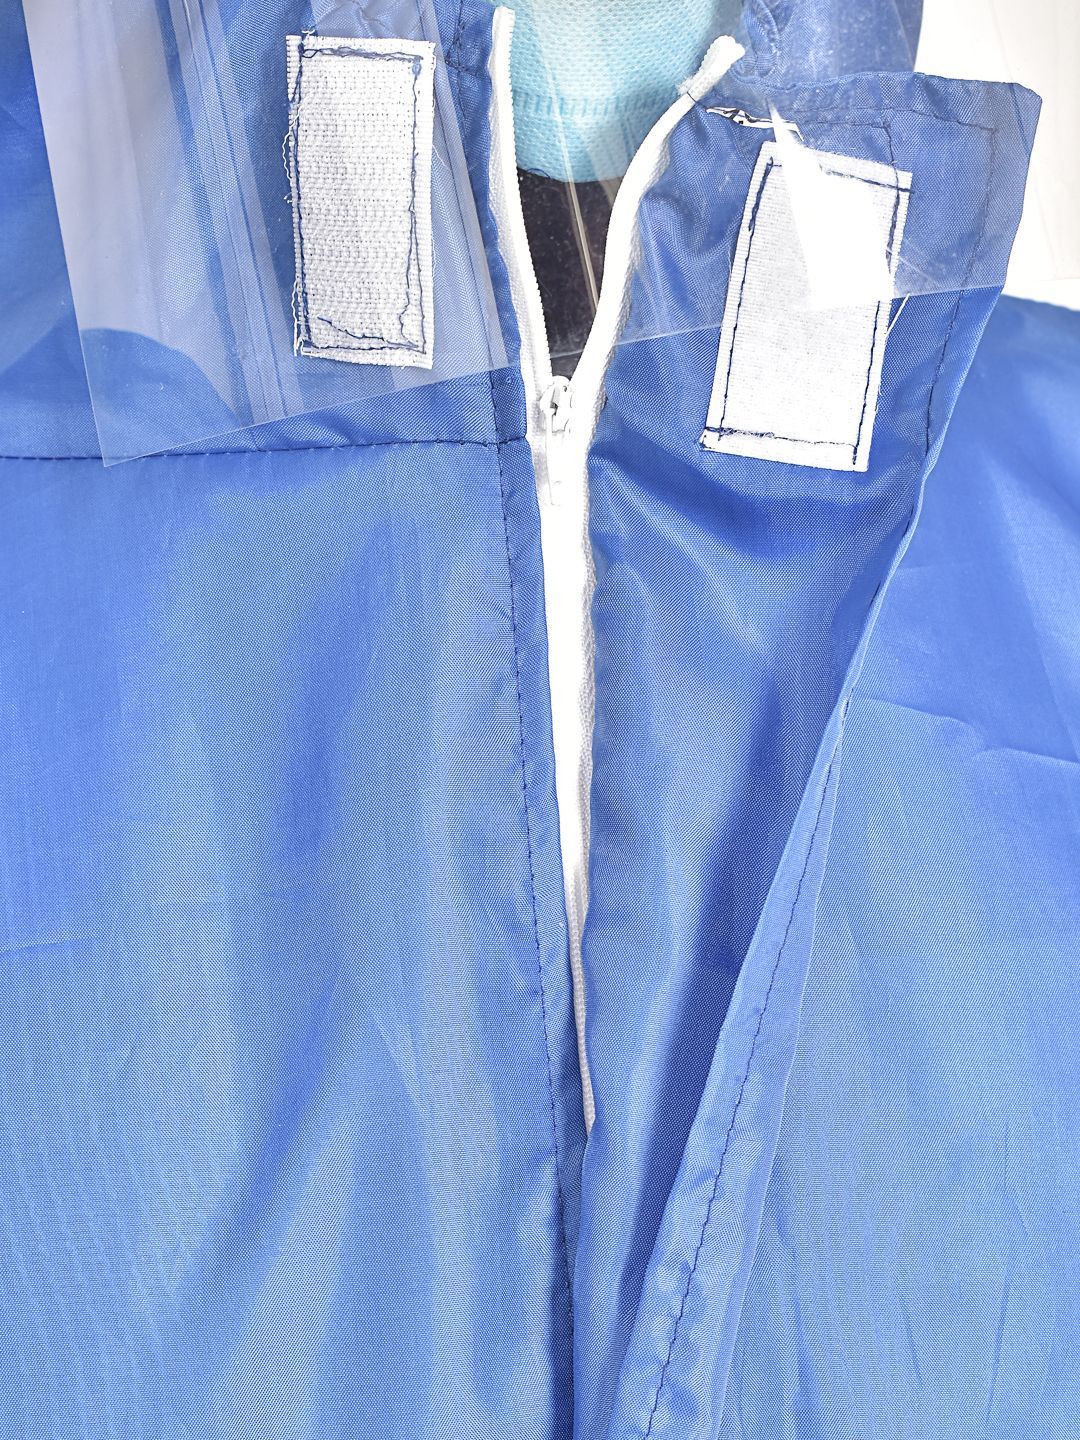 TAFFETA 50 GSM COVER ALL SUIT FOR HOSPITAL & CLINIC  STAFF